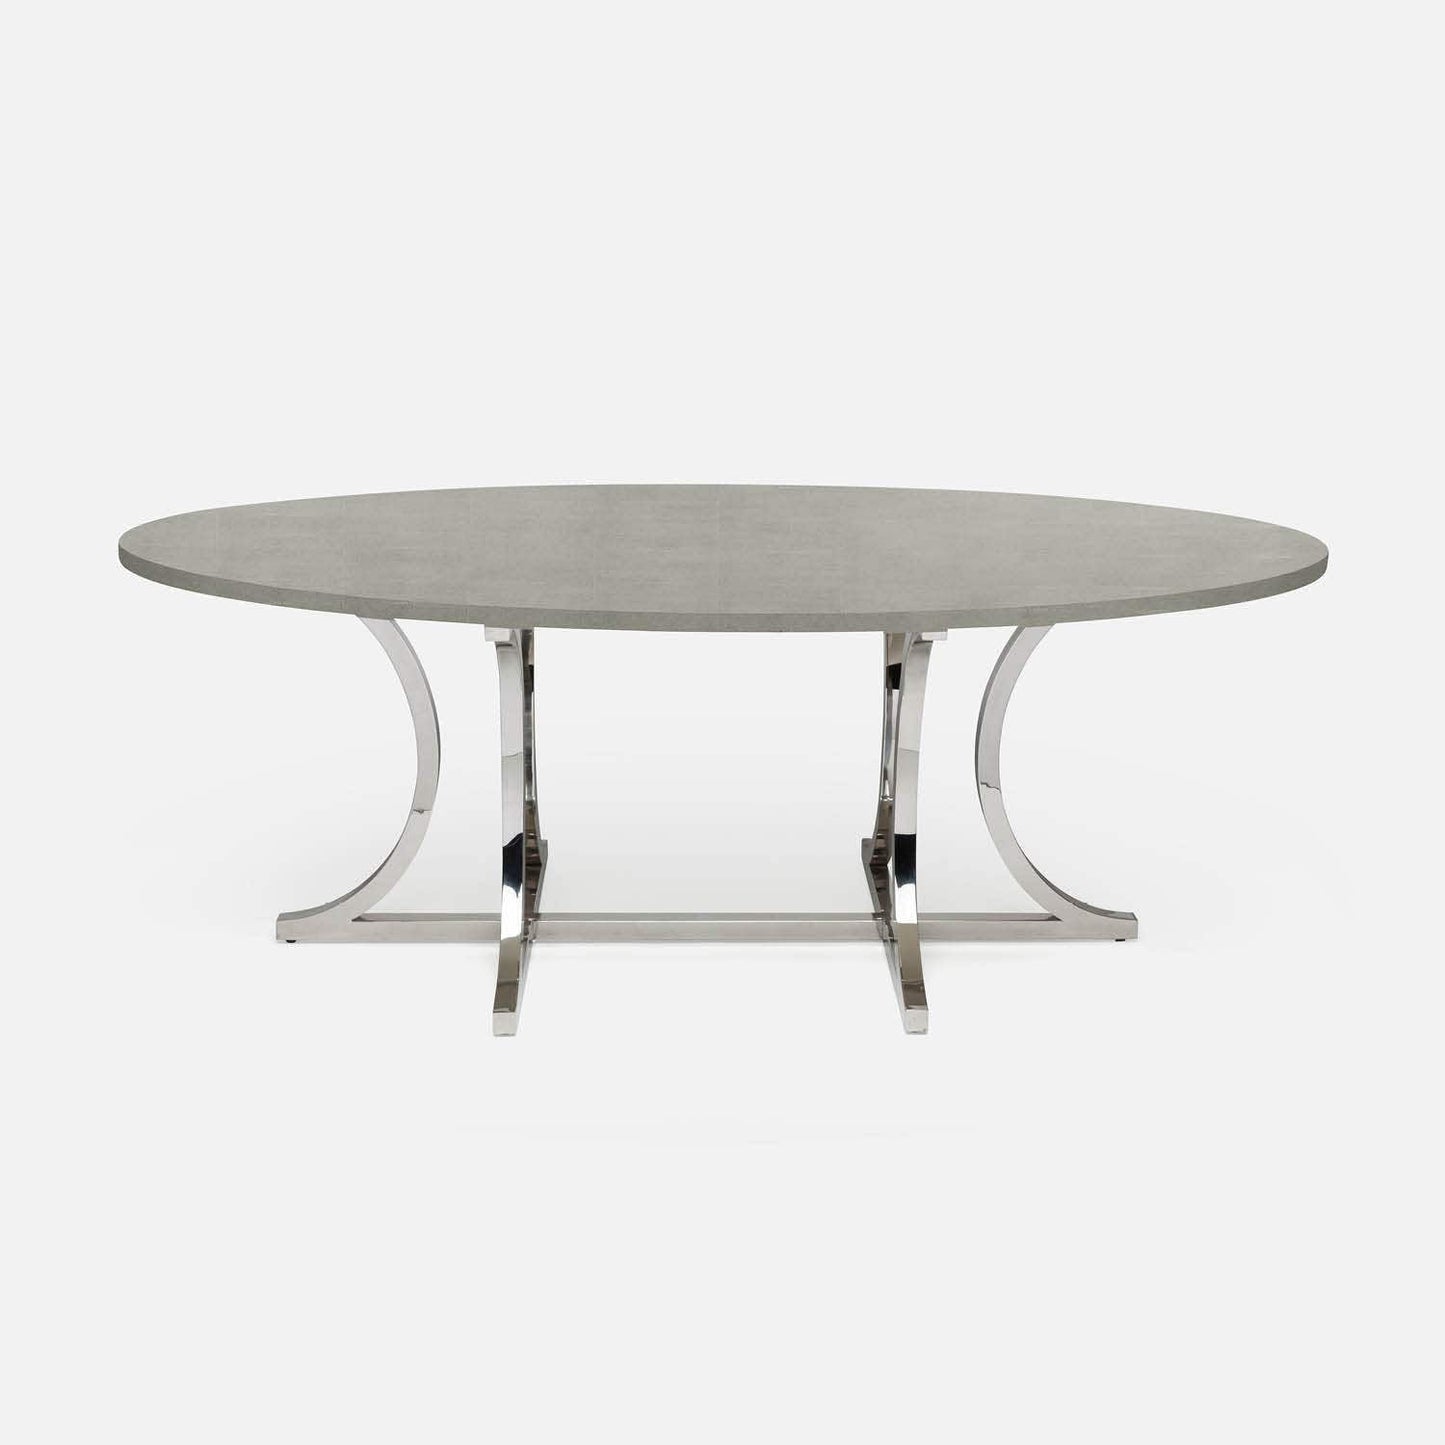 Made Goods Leighton 84" x 42" x 30" Polished Silver Steel Dinning Table With Oval Castor Gray Vintage Faux Shagreen Table Top